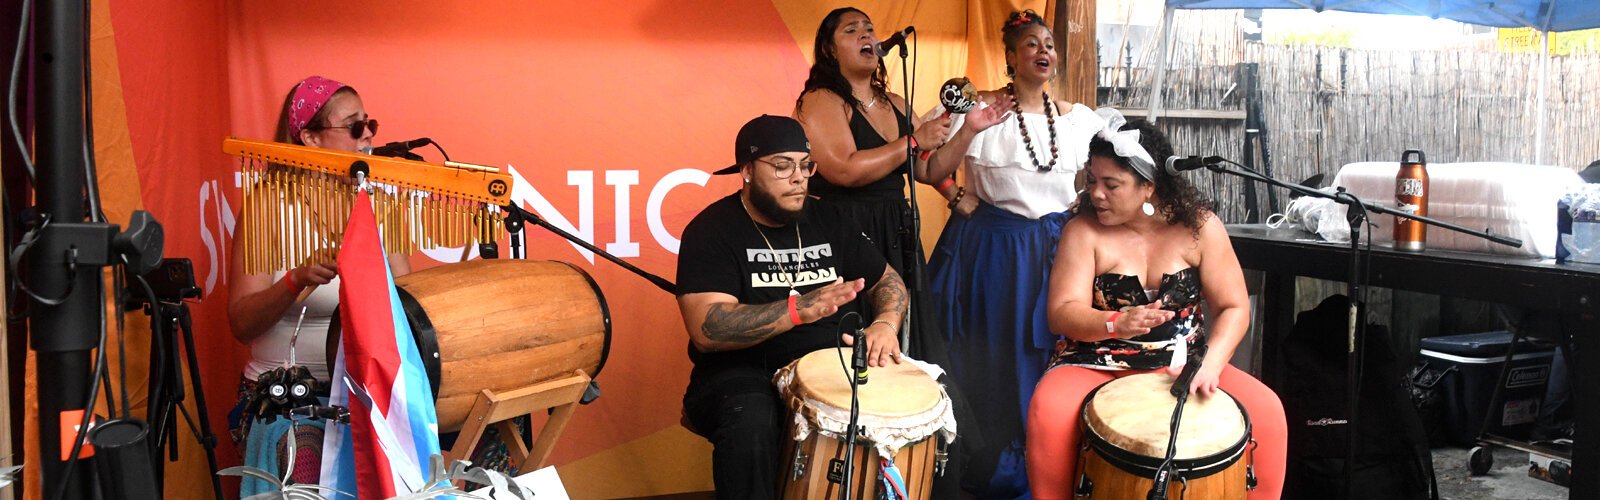 Performing in the courtyard, the Bomba Body Dance and Drumming Academy of Tampa Bay shares through their music an Afro Puerto Rican cultural experience with their audience.